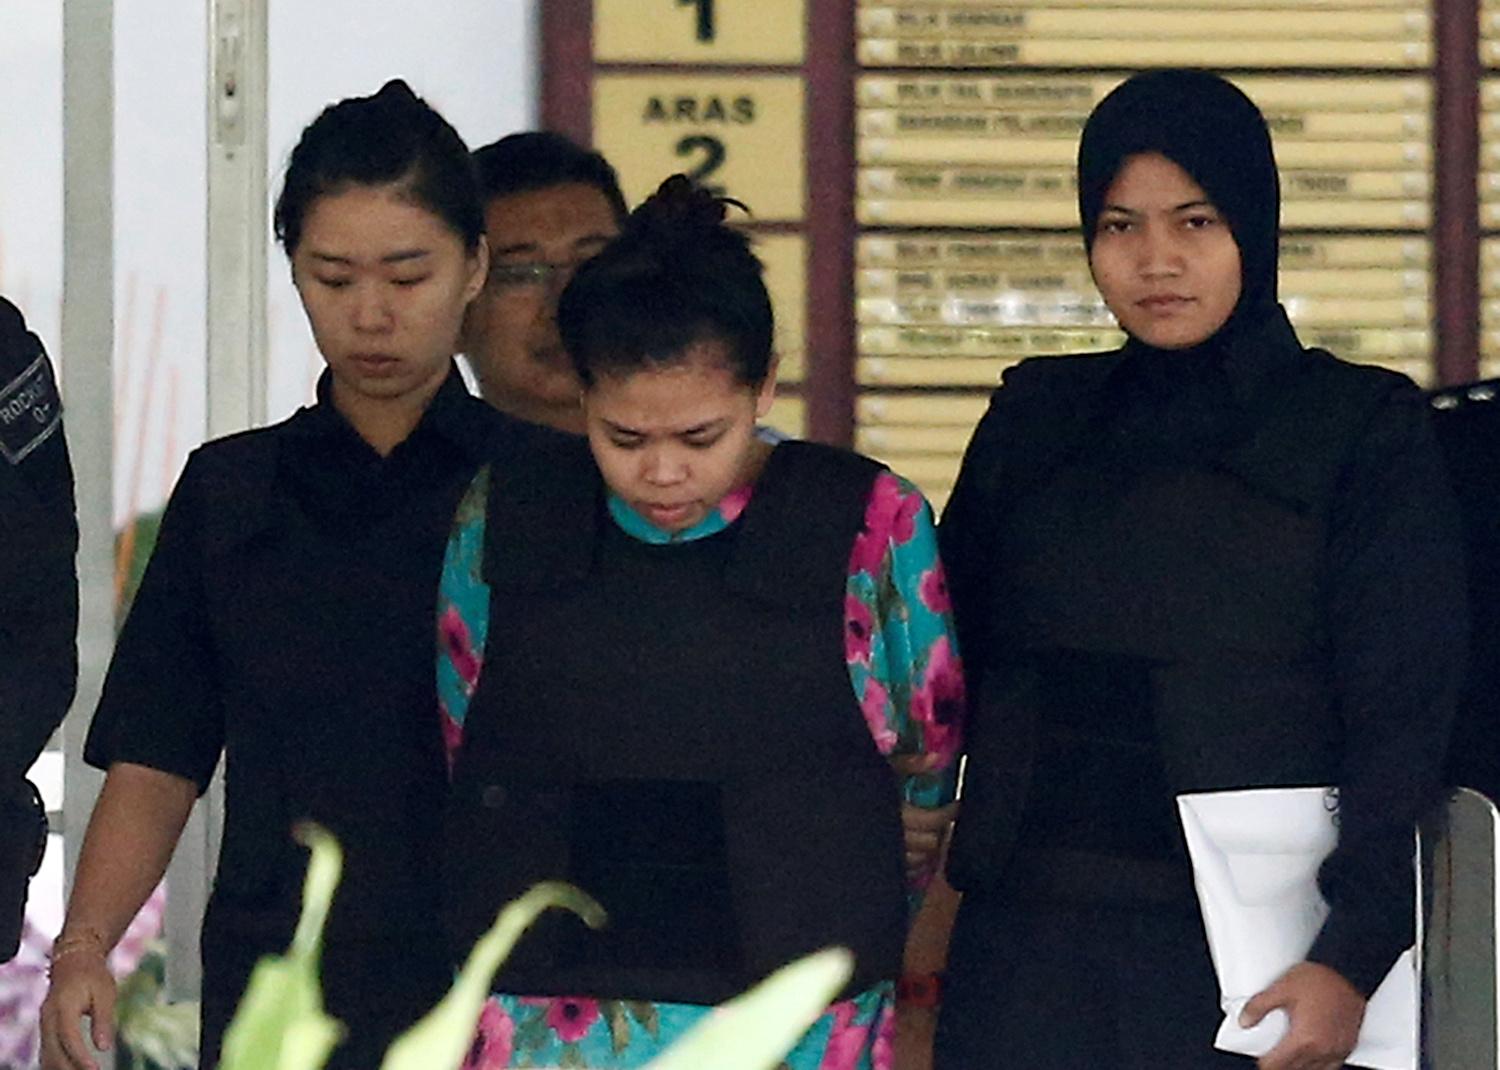 Indonesian Siti Aisyah is on trial for the killing of Kim Jong Nam, the estranged half-brother of North Korea's leader.